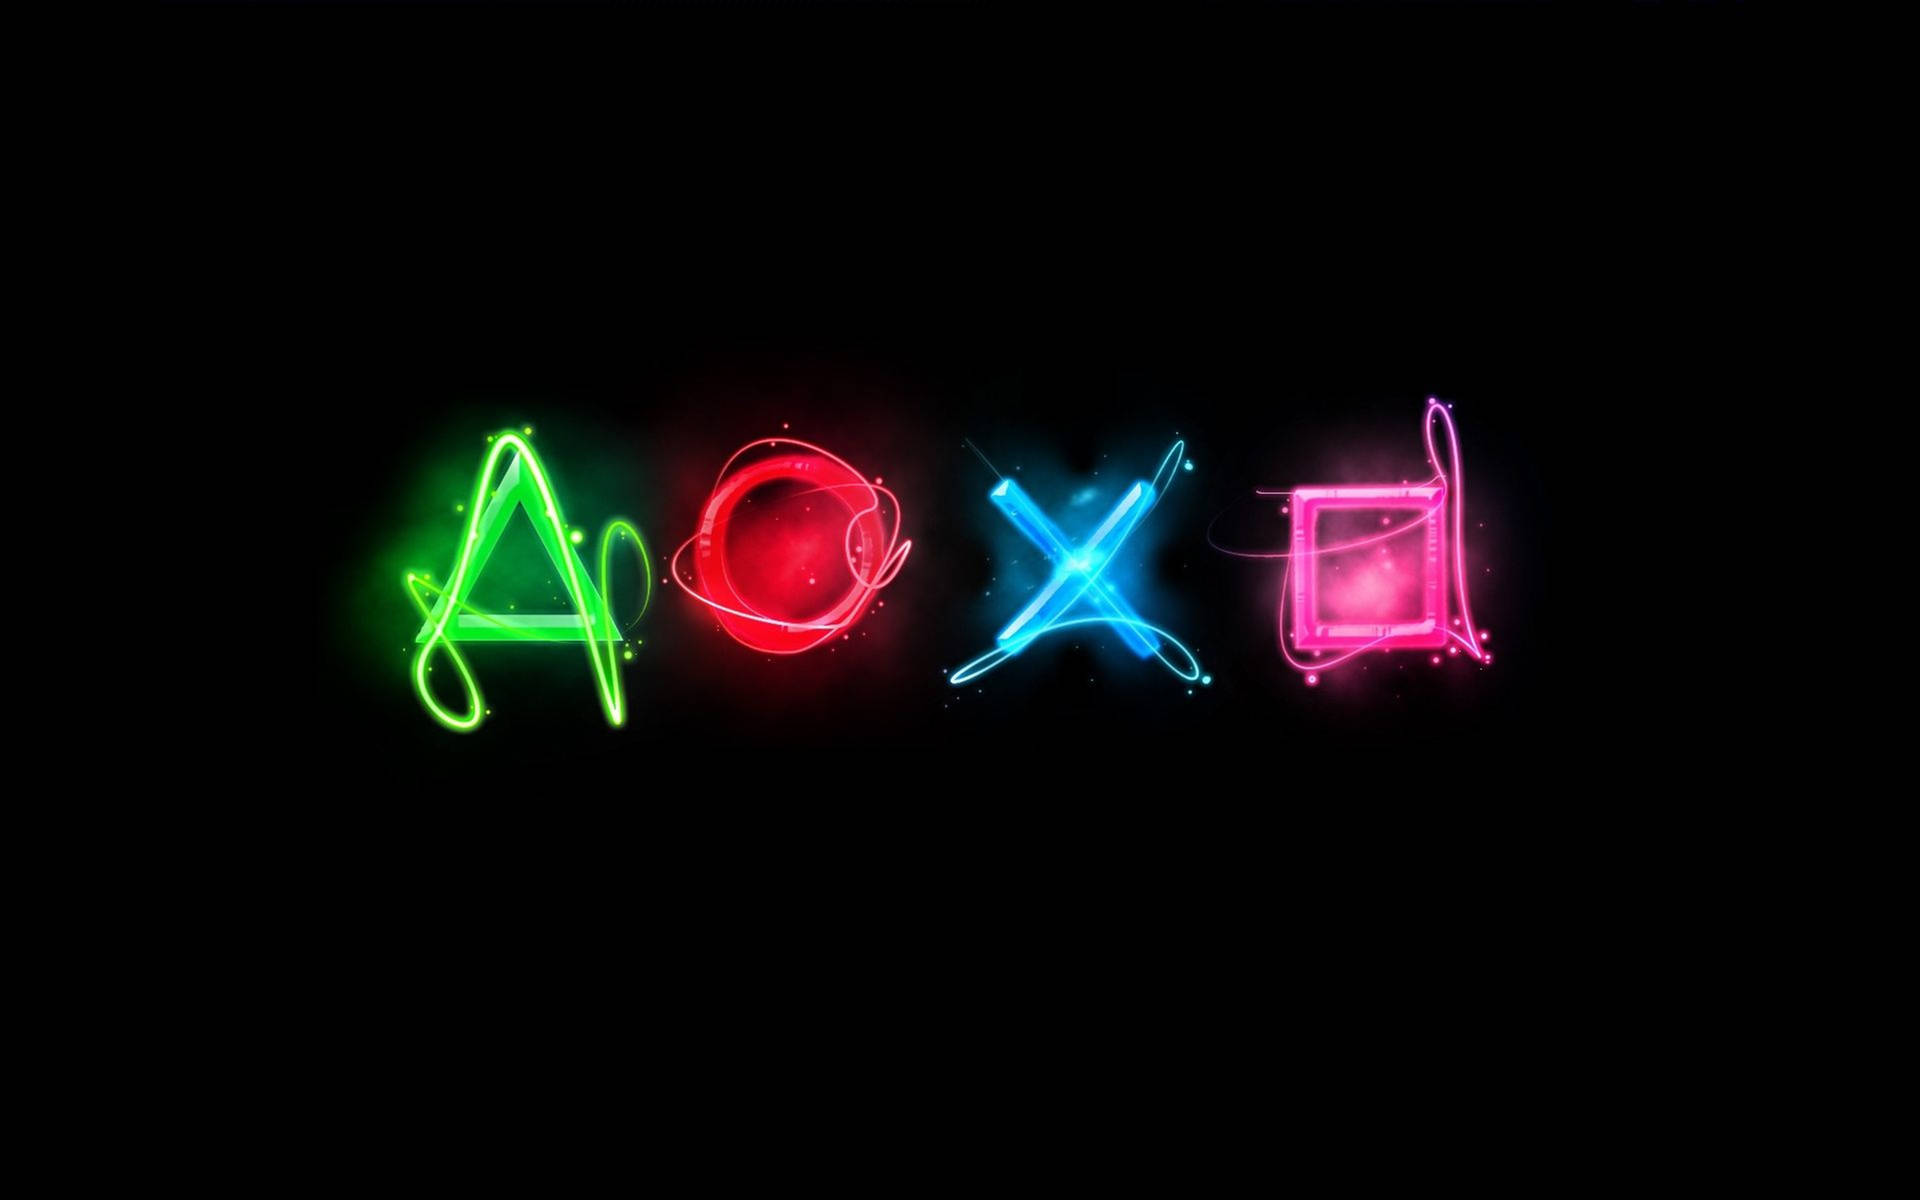 Action Button Logos With Neon Designs 4K PS4 Wallpaper